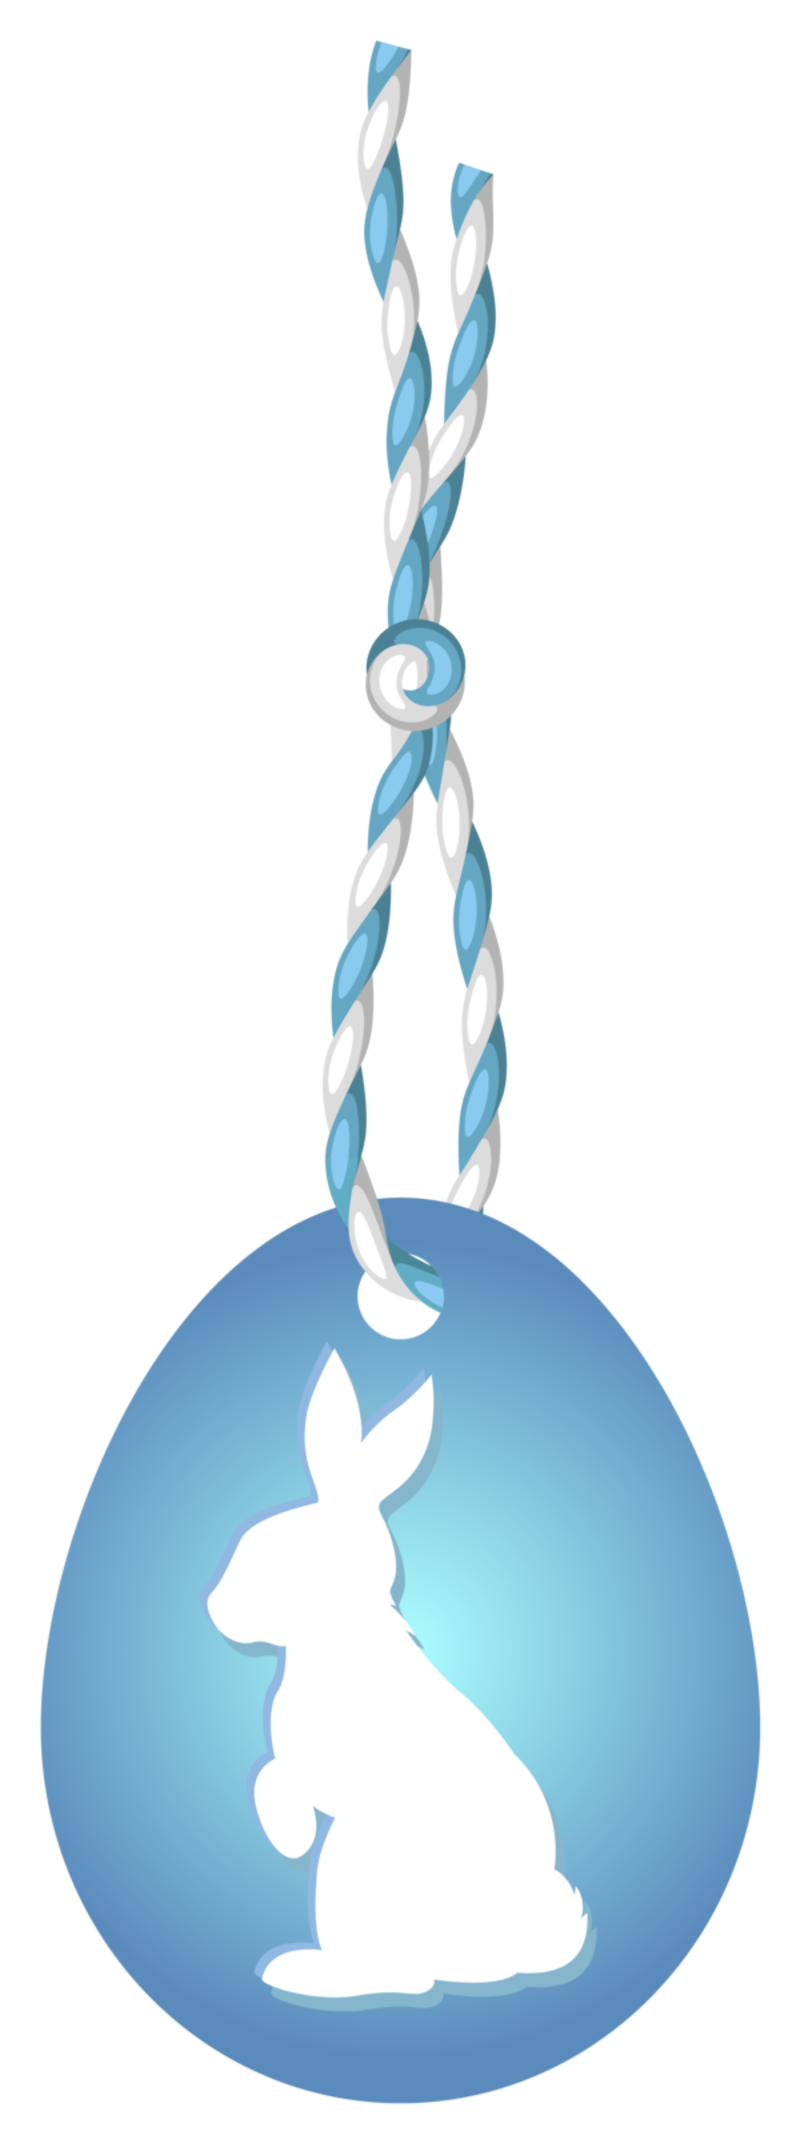 Blue_Easter_Hanging_Egg_with_Bunny_PNG_Clip_Art_Image.png